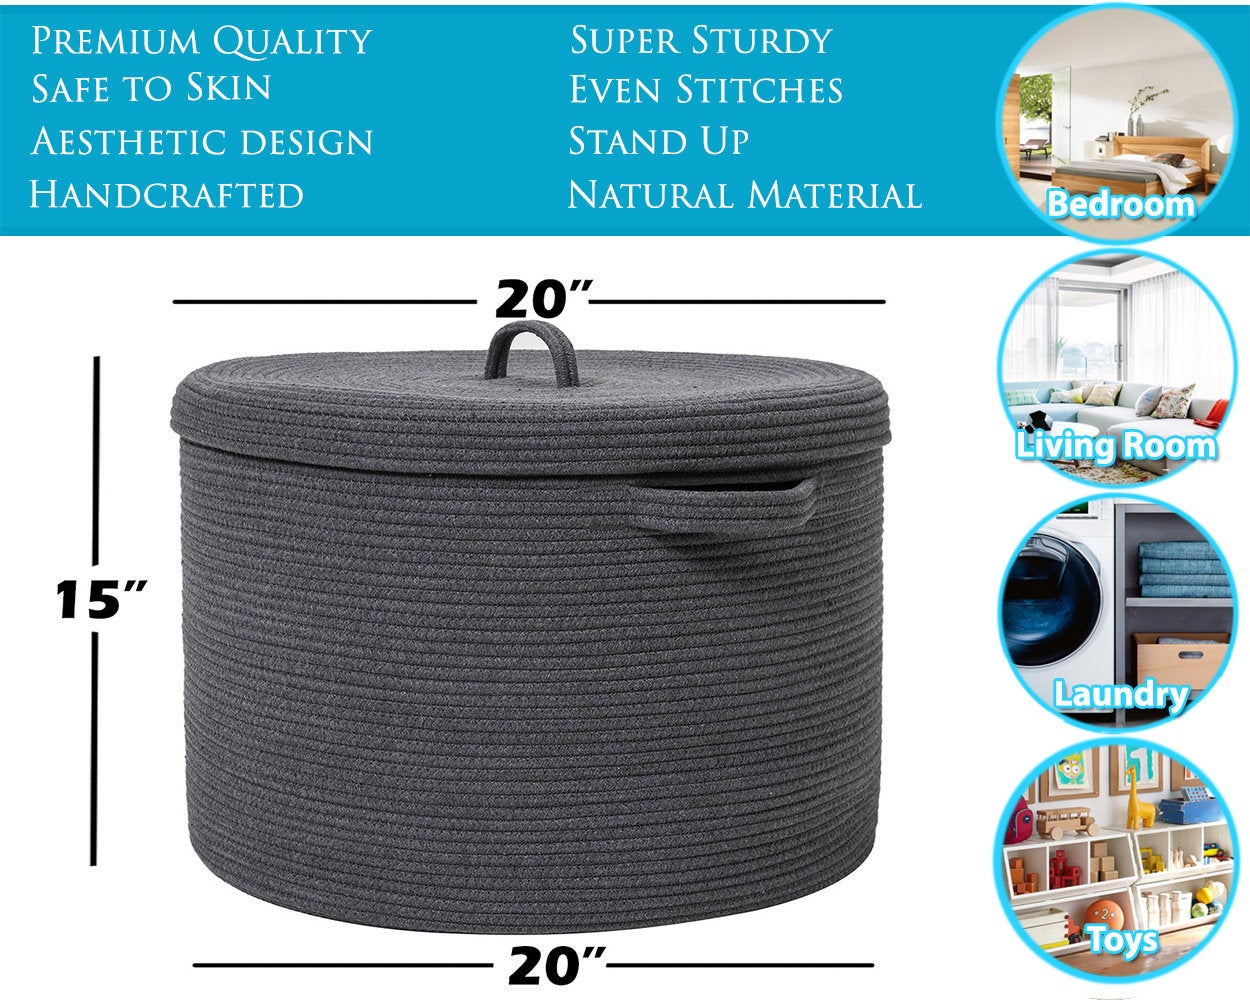 20" x 20" x 15" Extra Large Storage Basket with Lid, Cotton Rope Storage Baskets, Laundry Hamper, Toy Bin, Large Basket Dark Grey with Cover